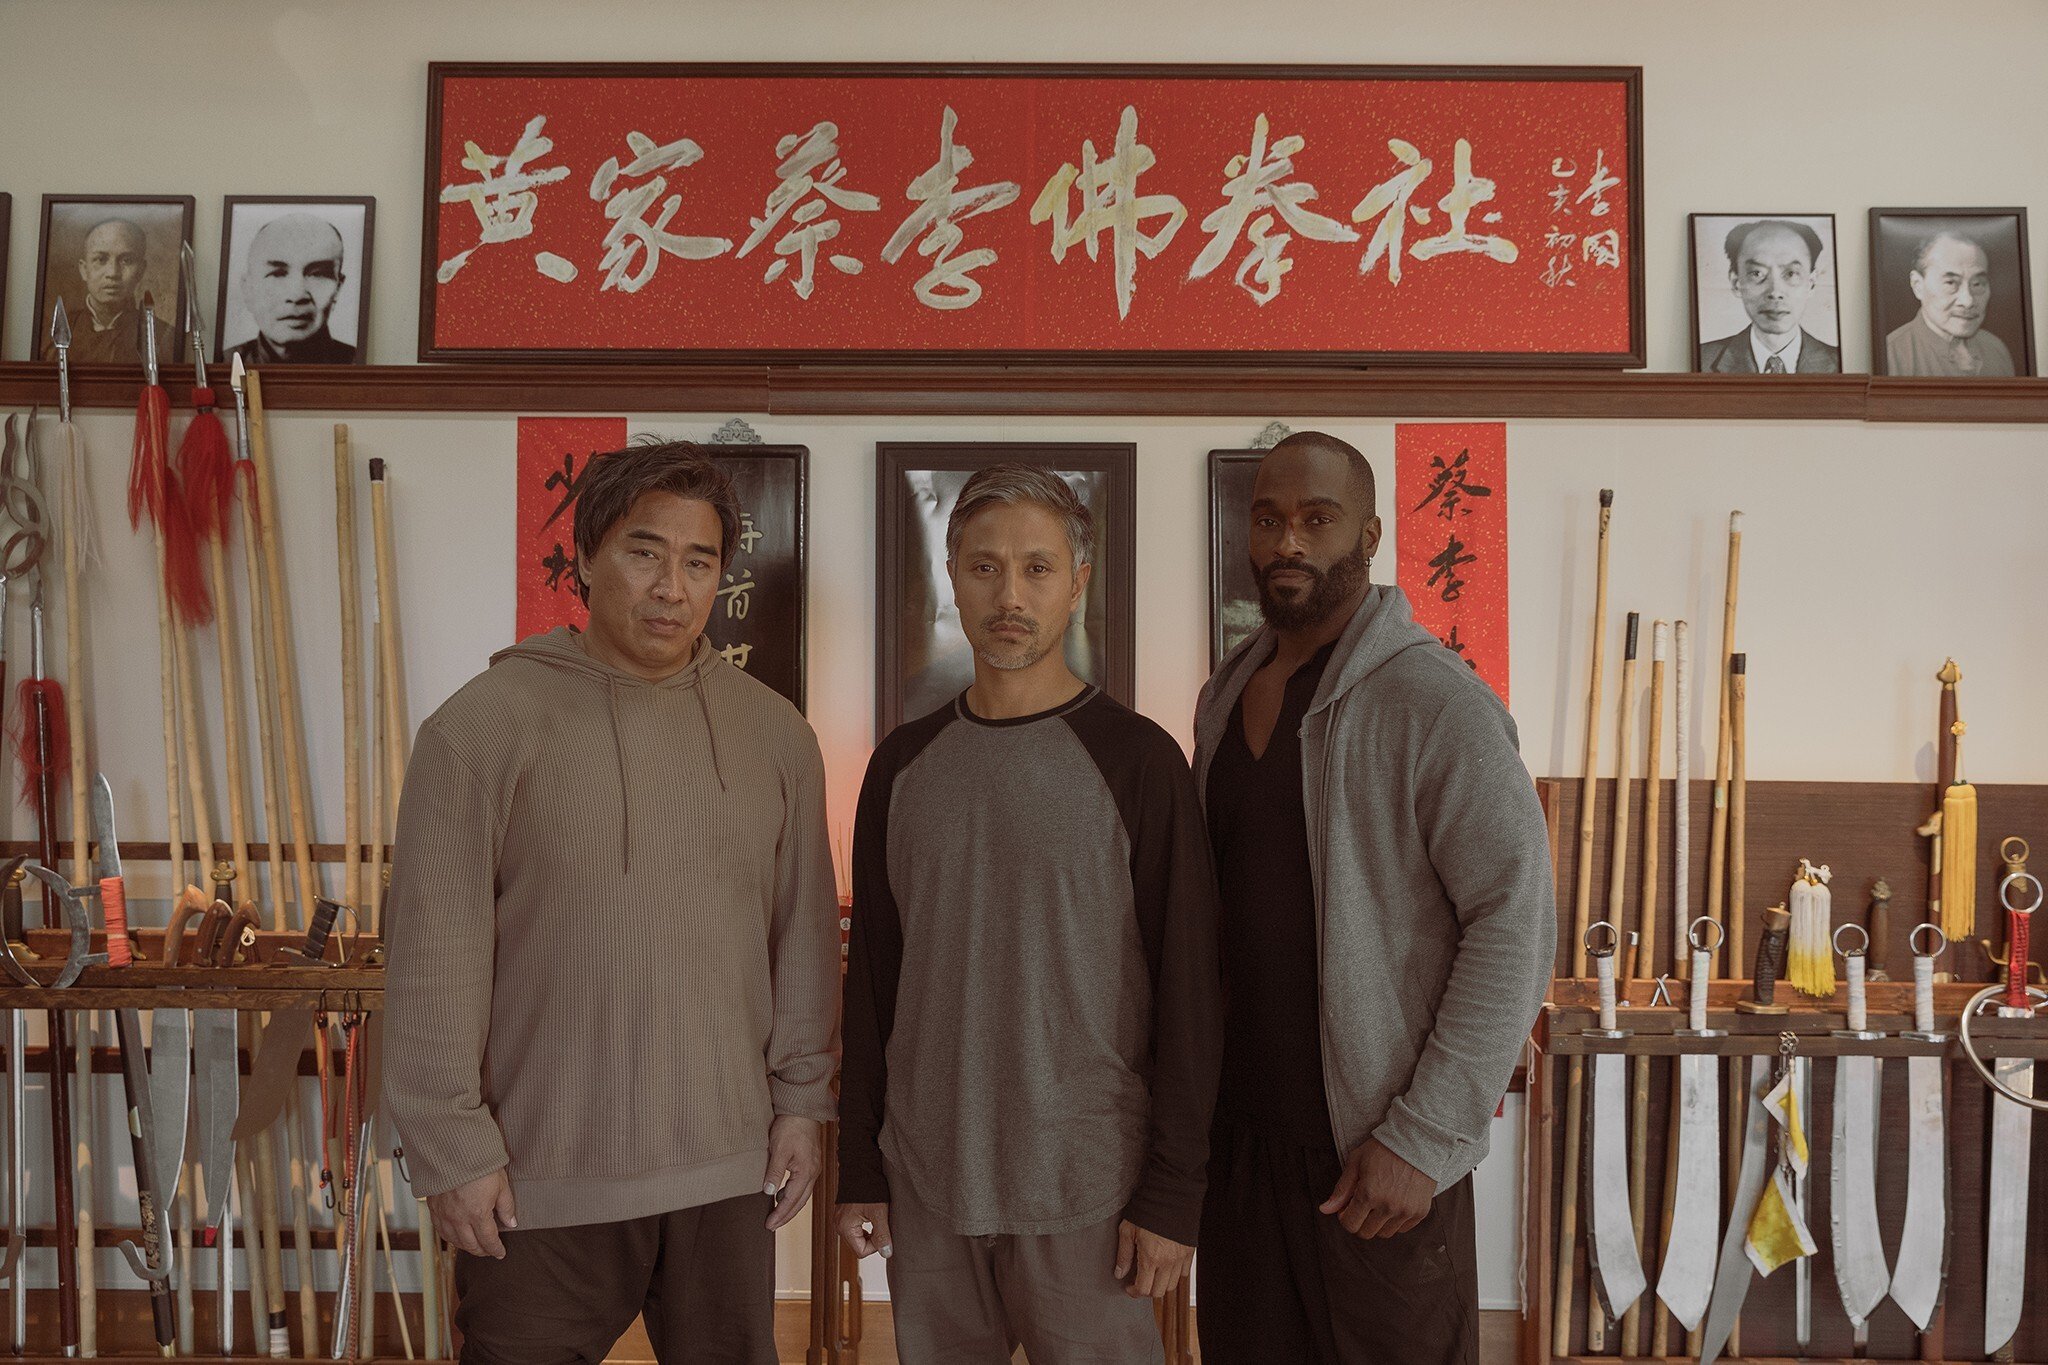 (From left) Ron Yuan, Alain Uy and Mykel Shannon Jenkins as The Three Tigers, in a still from the film The Paper Tigers. Photo: Mark Malijan